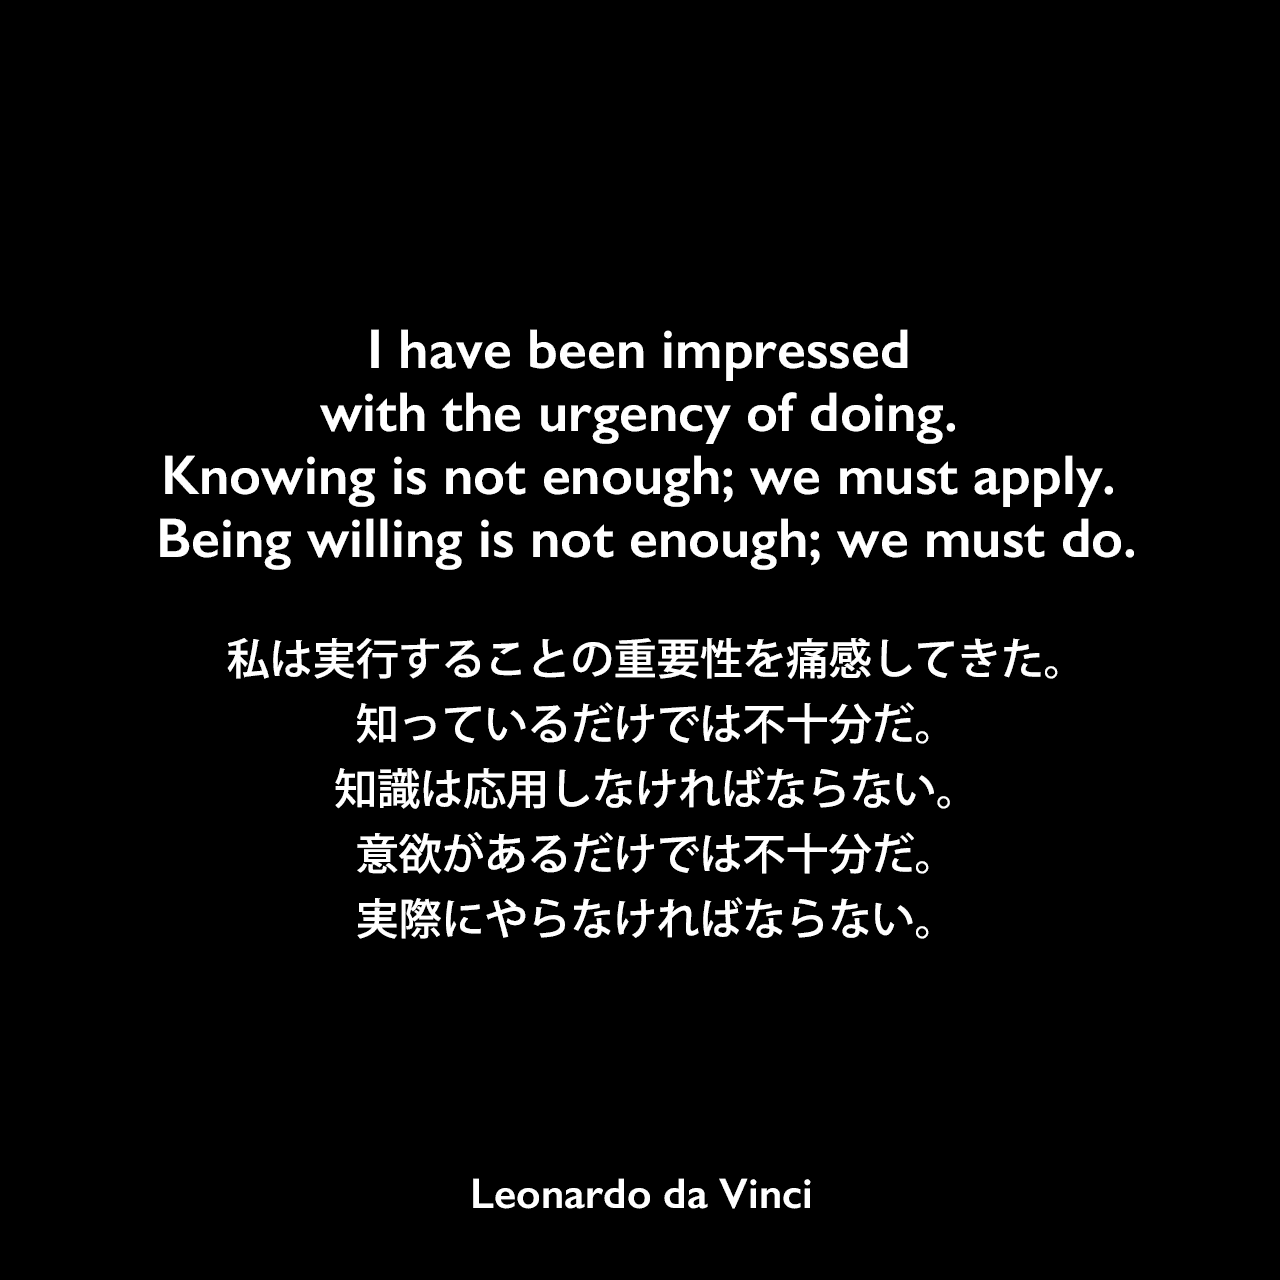 I have been impressed with the urgency of doing. Knowing is not enough; we must apply. Being willing is not enough; we must do.私は実行することの重要性を痛感してきた。知っているだけでは不十分だ。知識は応用しなければならない。意欲があるだけでは不十分だ。実際にやらなければならない。Leonardo da Vinci